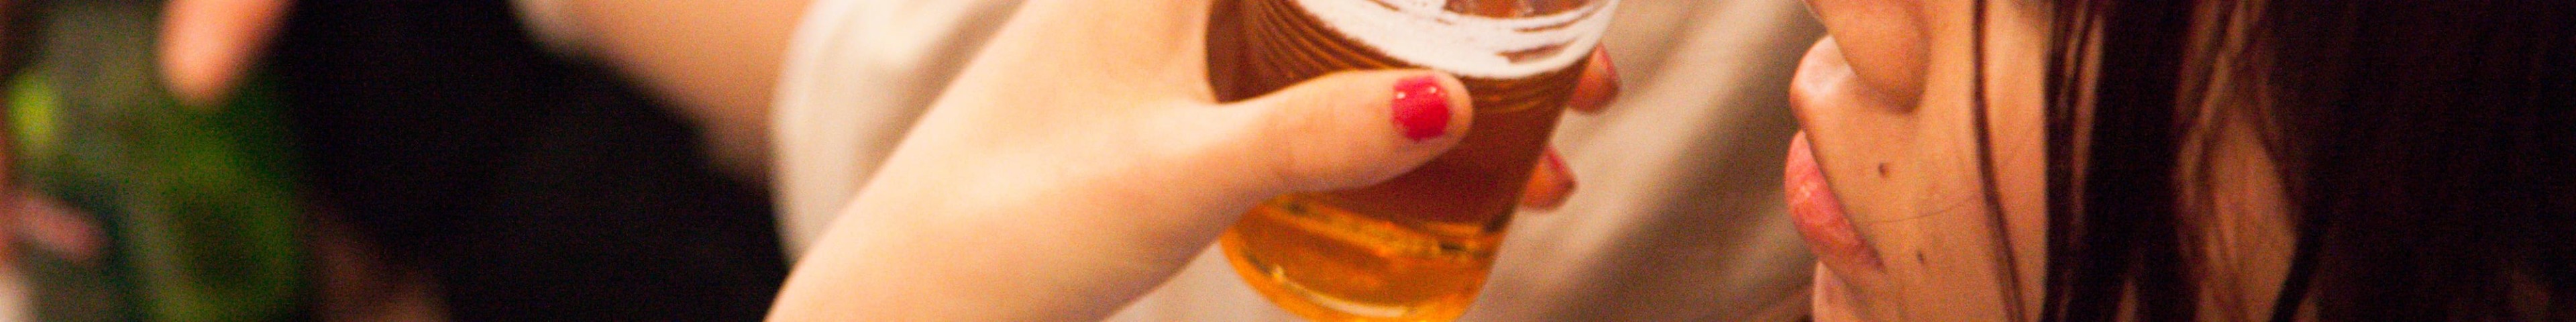 Image of a teenage girl holding a clear plastic cup filled with beer.